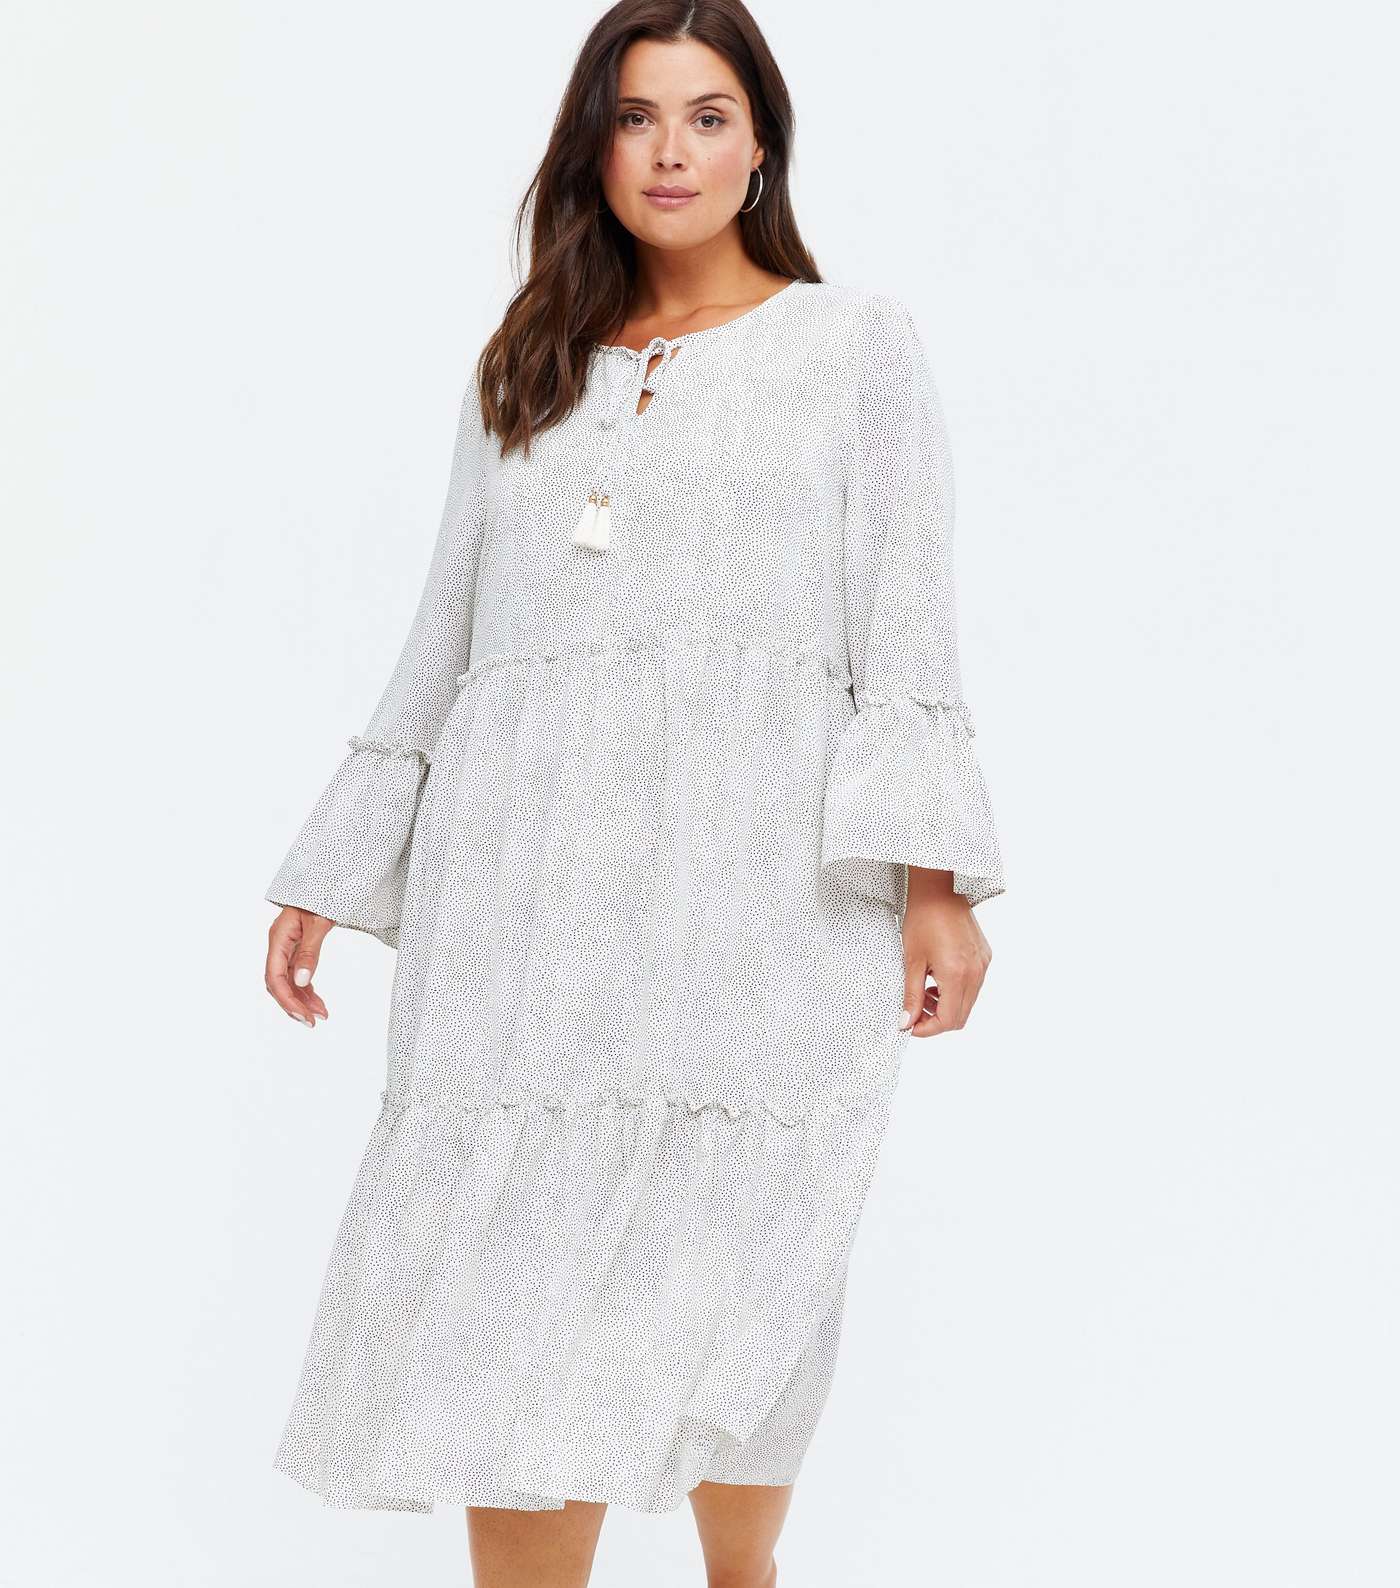 Yumi Curves White Spot Tiered Dress